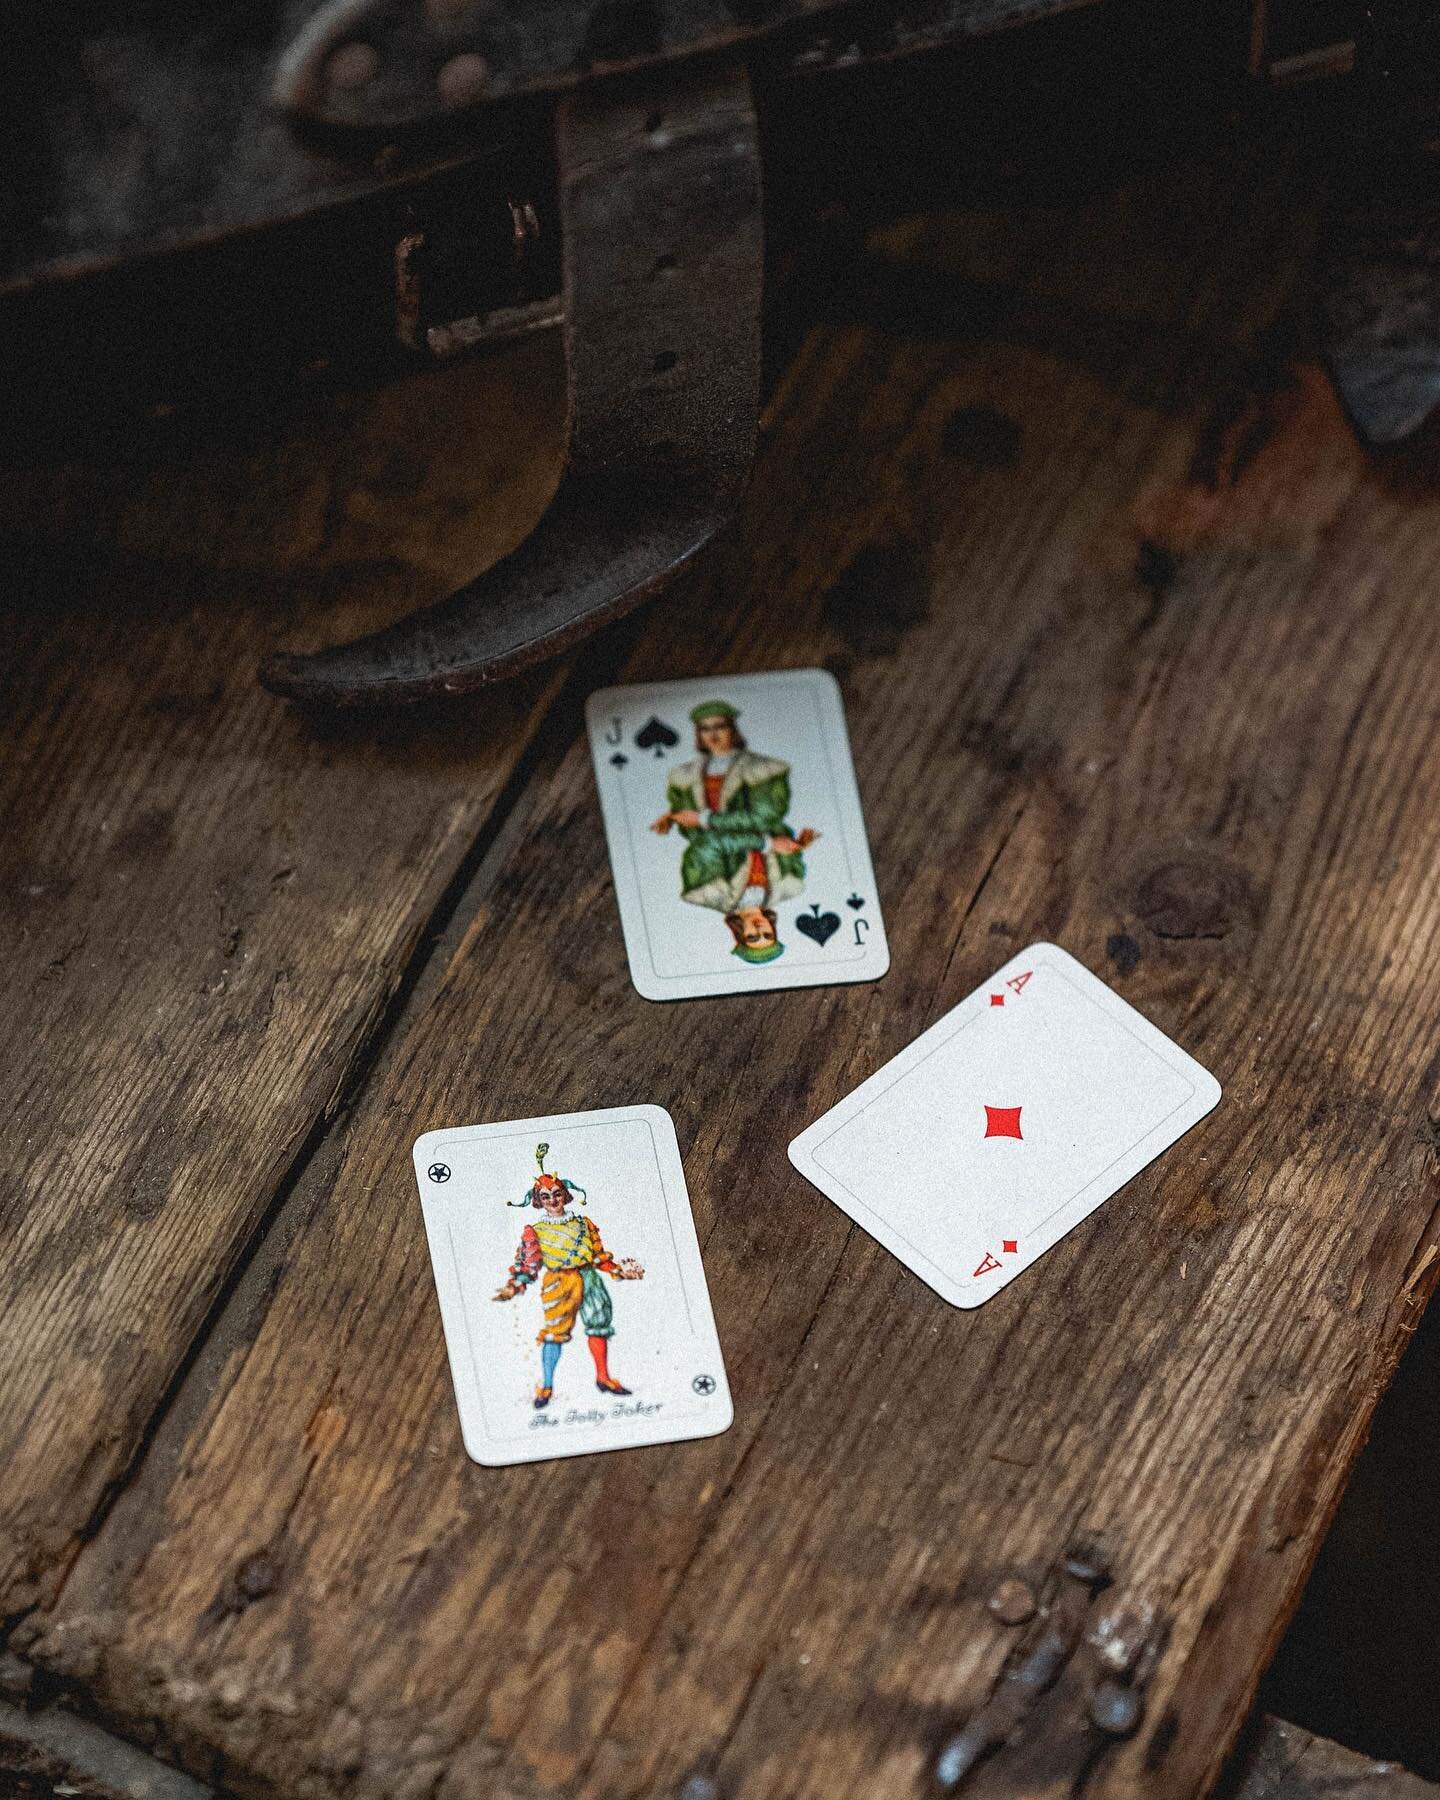 The game never ends when your whole world depends on the turn of a friendly card 🤔🤫

#playingcards #cardsofdivination #nostalgic #productphotography #vintagestyle #cinamaticphotography #storytelling #picoftheday #moodygrams #alanparsonsproject  #tu